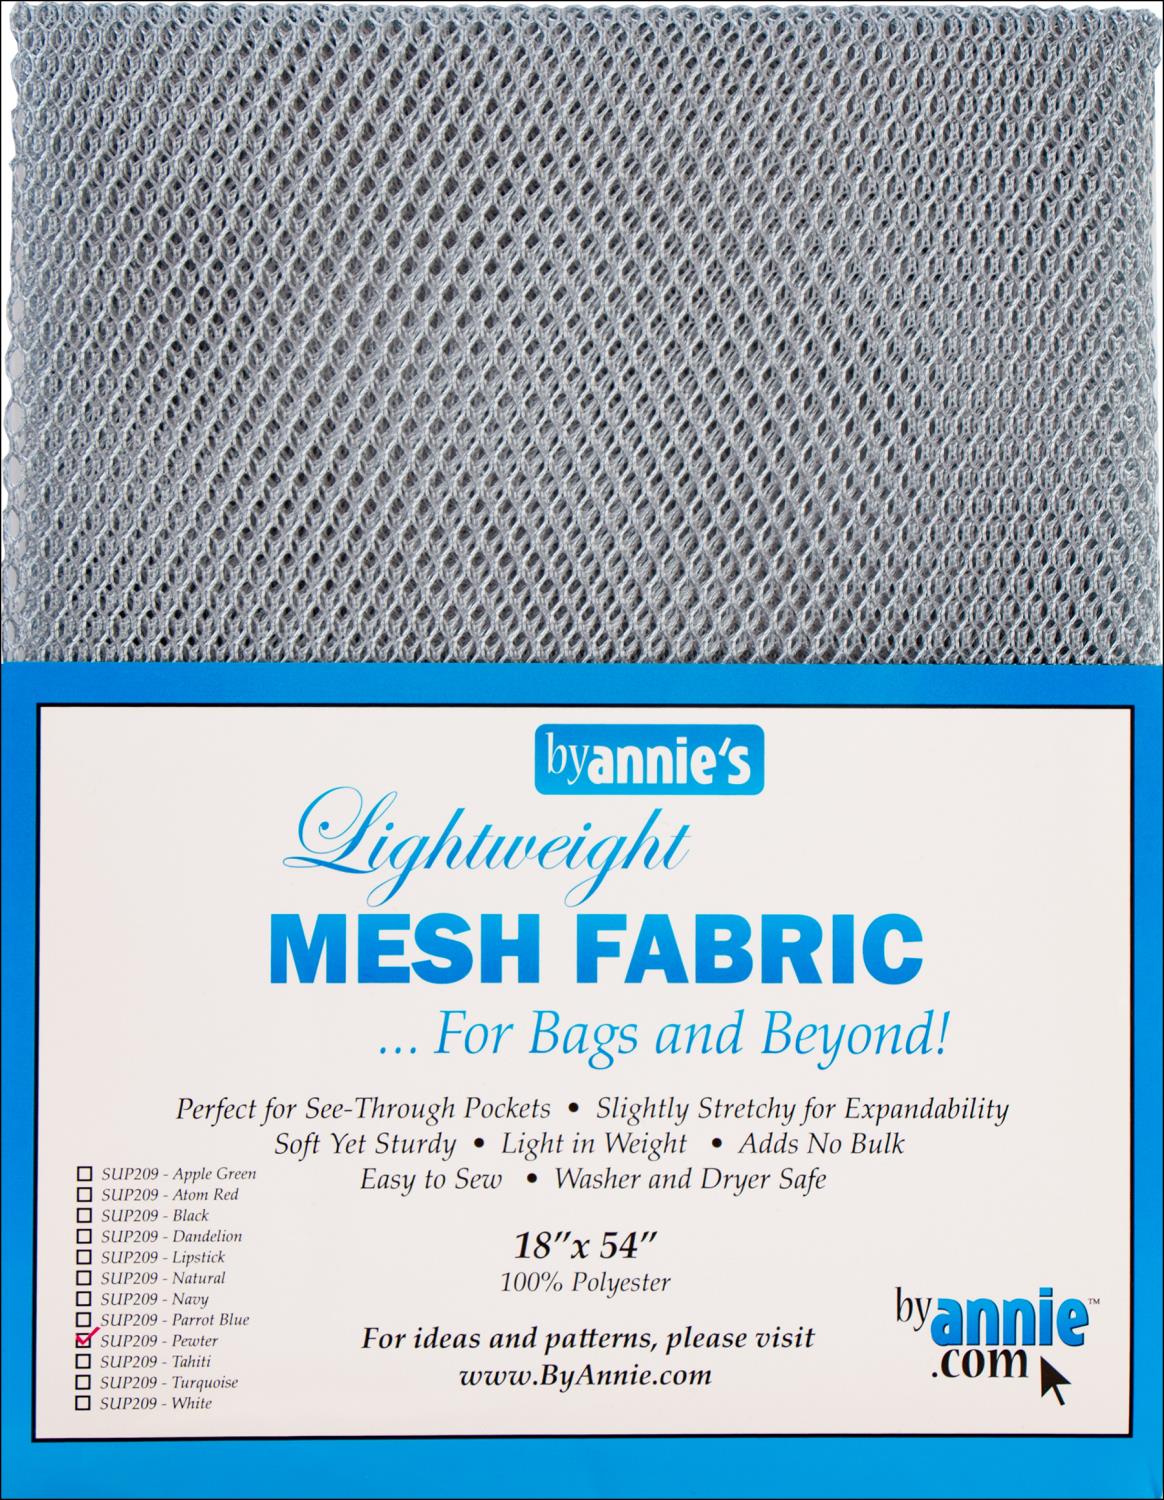 By Annie's Mesh fabric SUP209 - Pewter